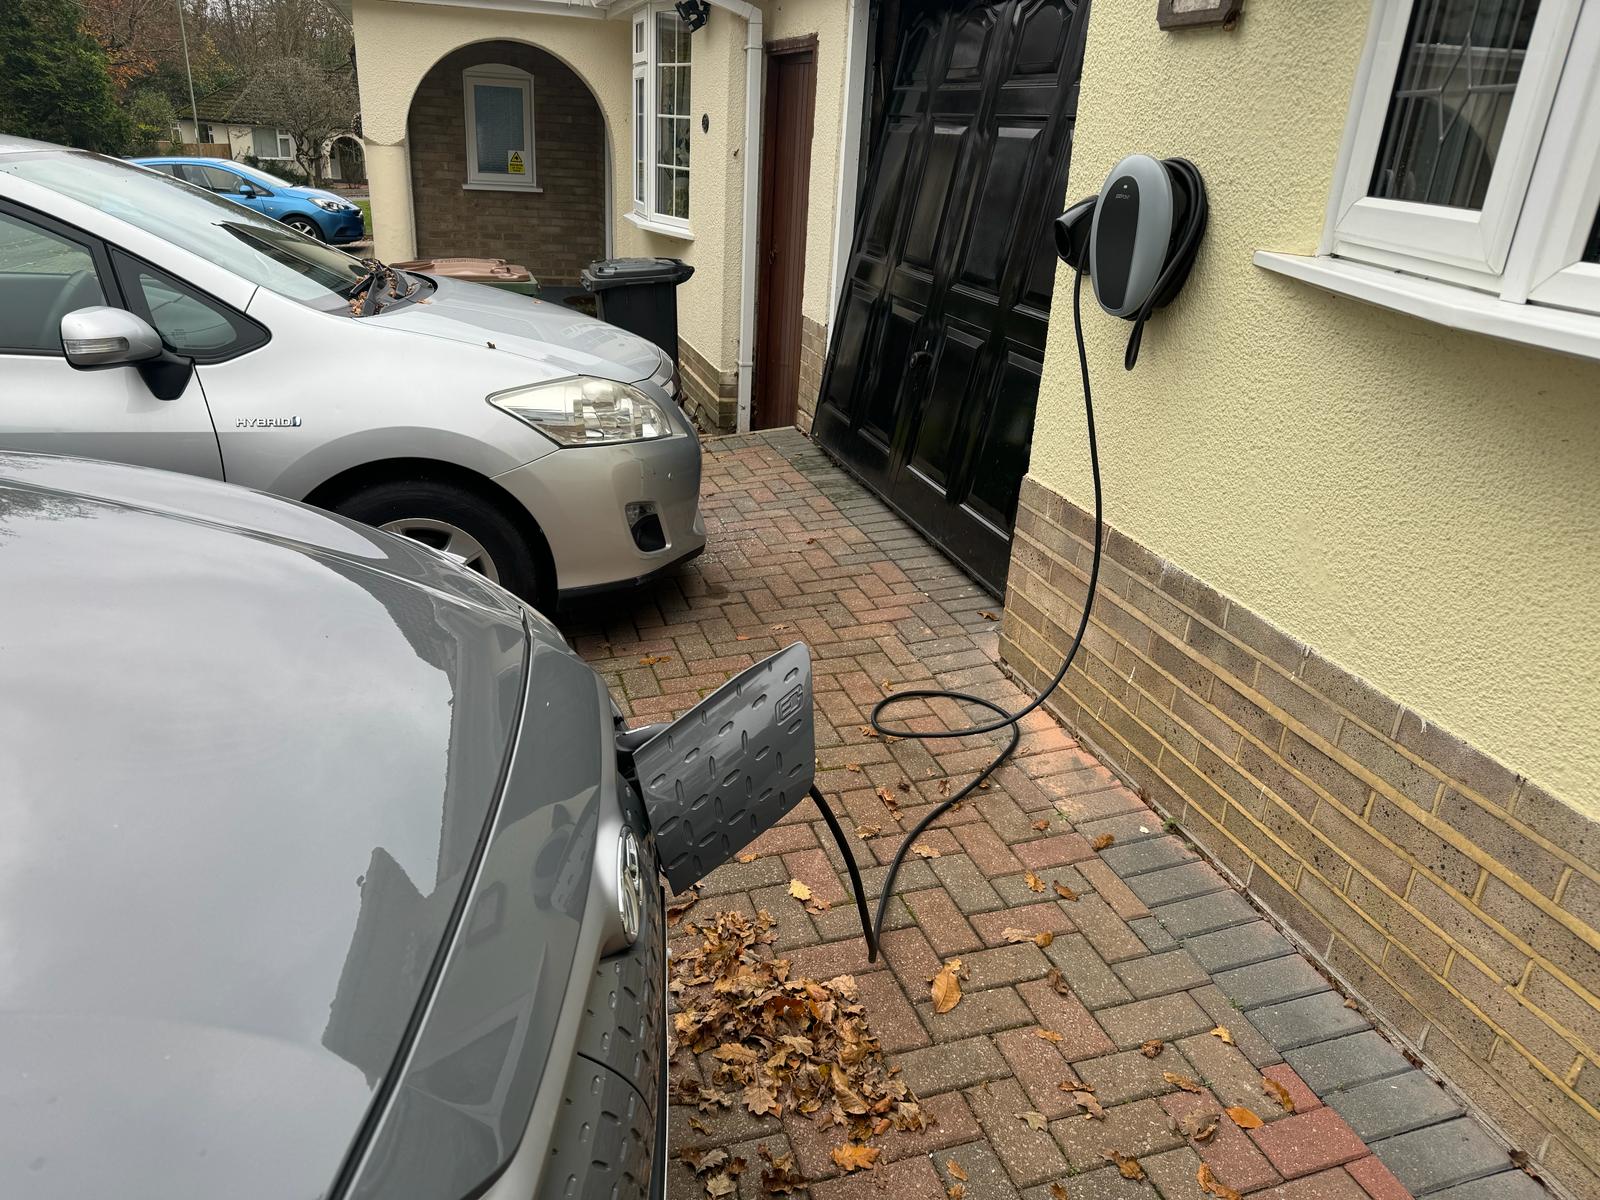 pod point ev charging point installed at the front of the property including new consumer unit for home